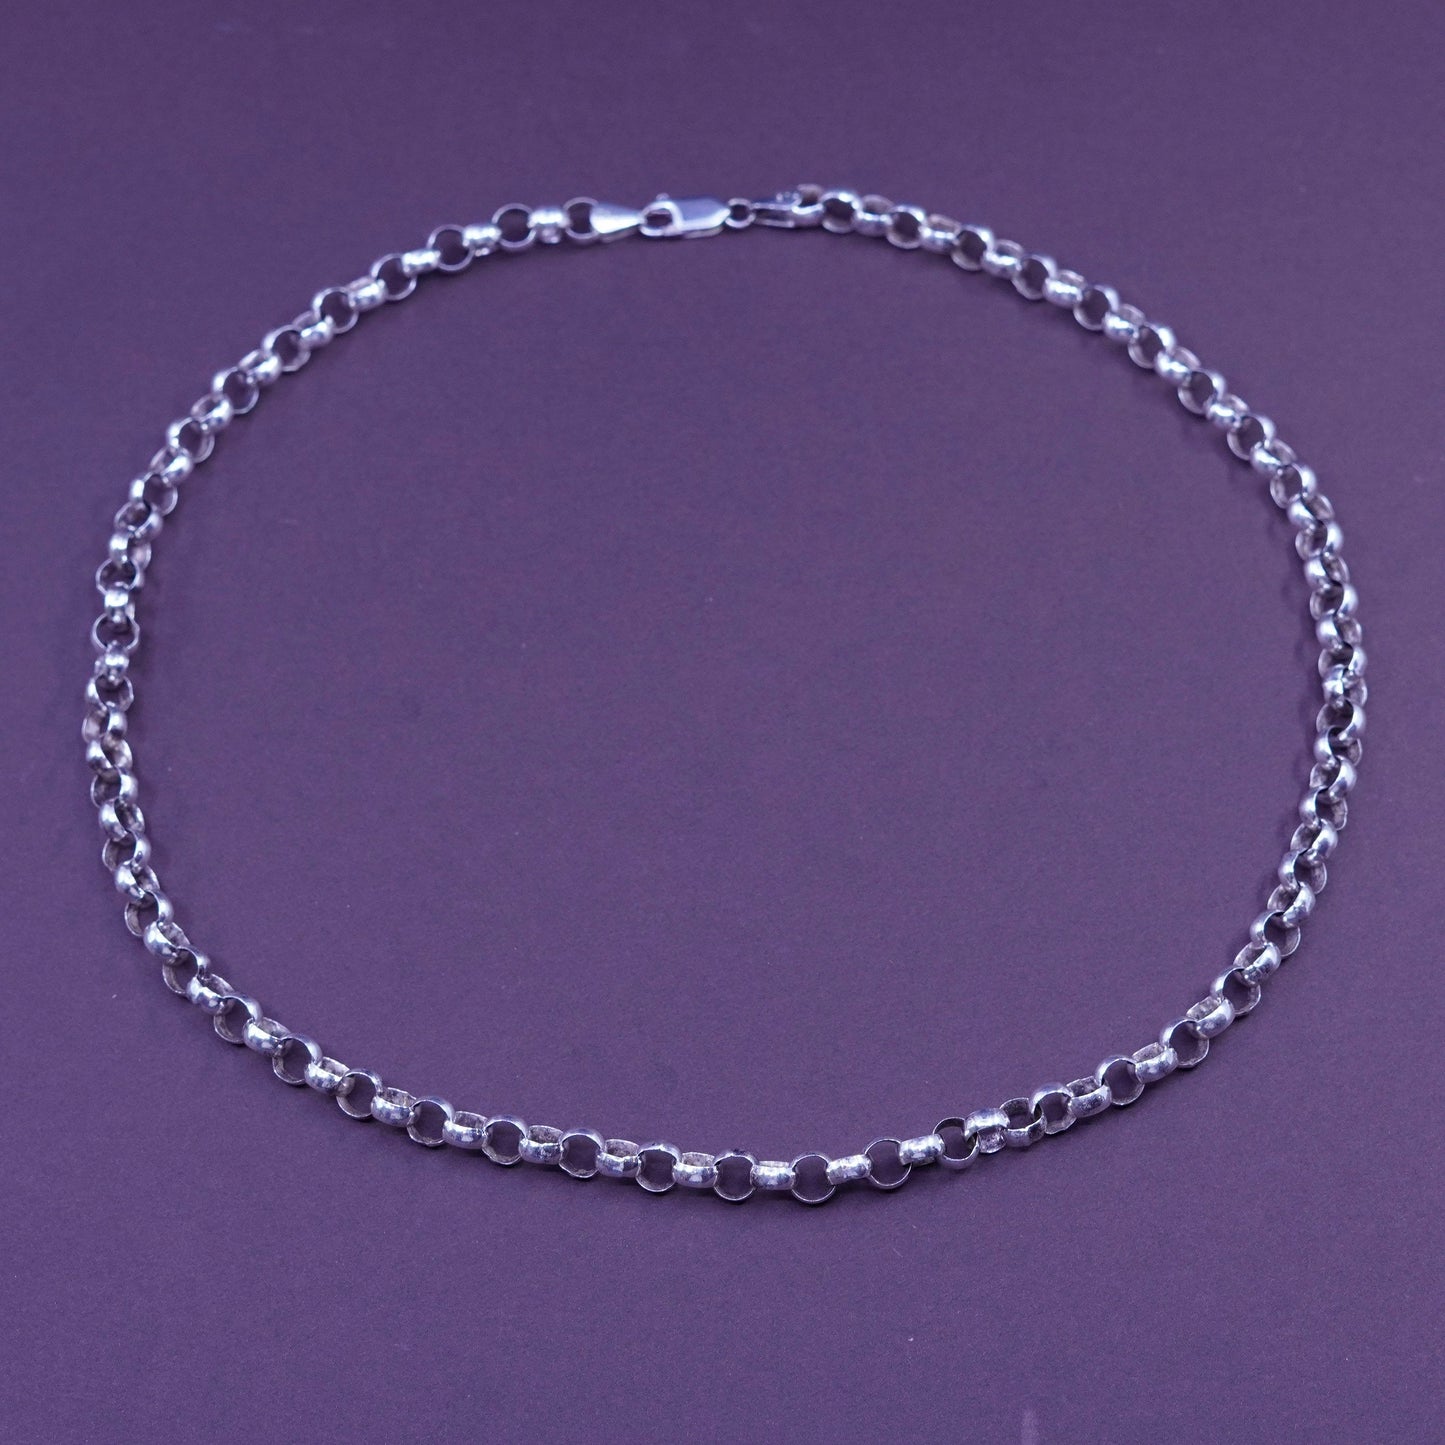 19”, 7mm, vintage Sterling silver necklace, 925 bold circle link chain